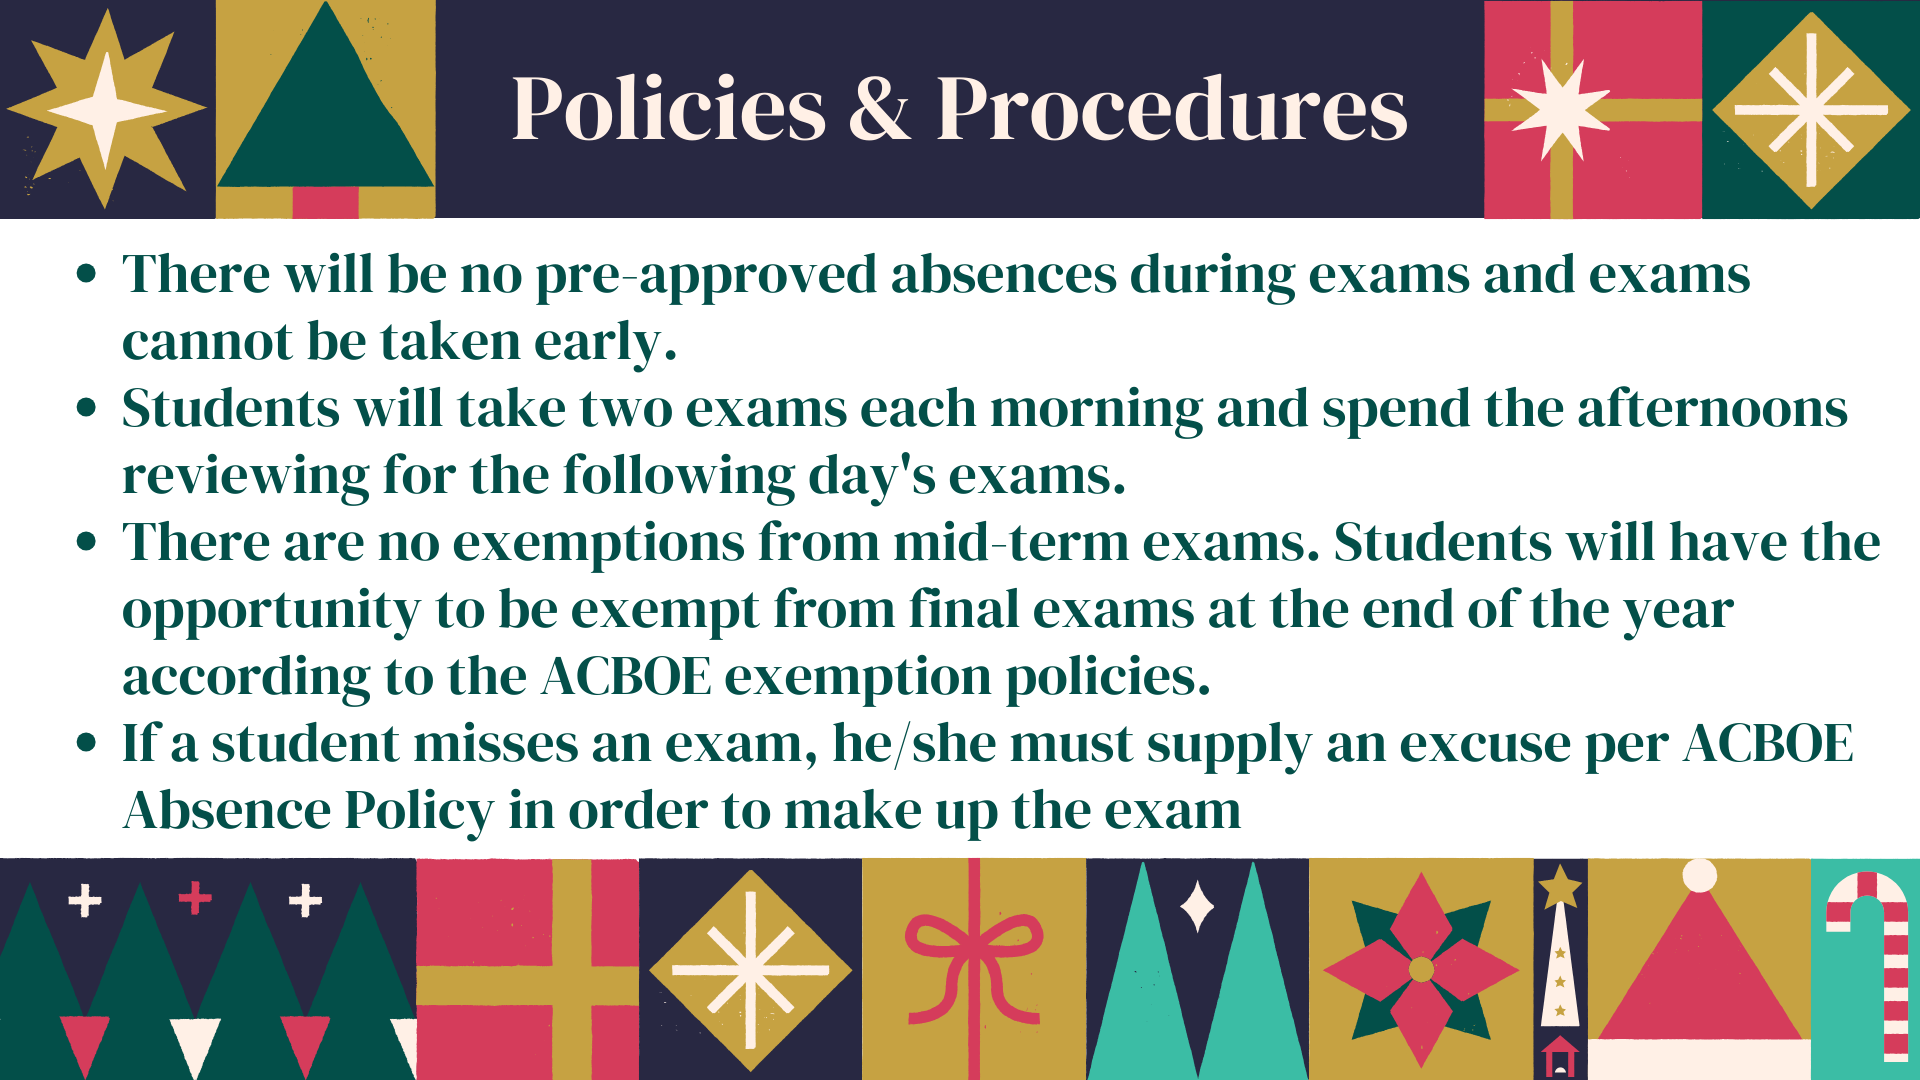 Exam policies: There will be no pre-approved absences during exams and exams cannot be taken early. Students will take two exams each morning and spend the afternoons reviewing for the following day's exams.  There are no exemptions from mid-term exams. Students will have the opportunity to be exempt from final exams at the end of the year according to the ACBOE exemption policies.  If a student misses an exam, he/she must supply an excuse per ACBOE Absence Policy in order to make up the exam